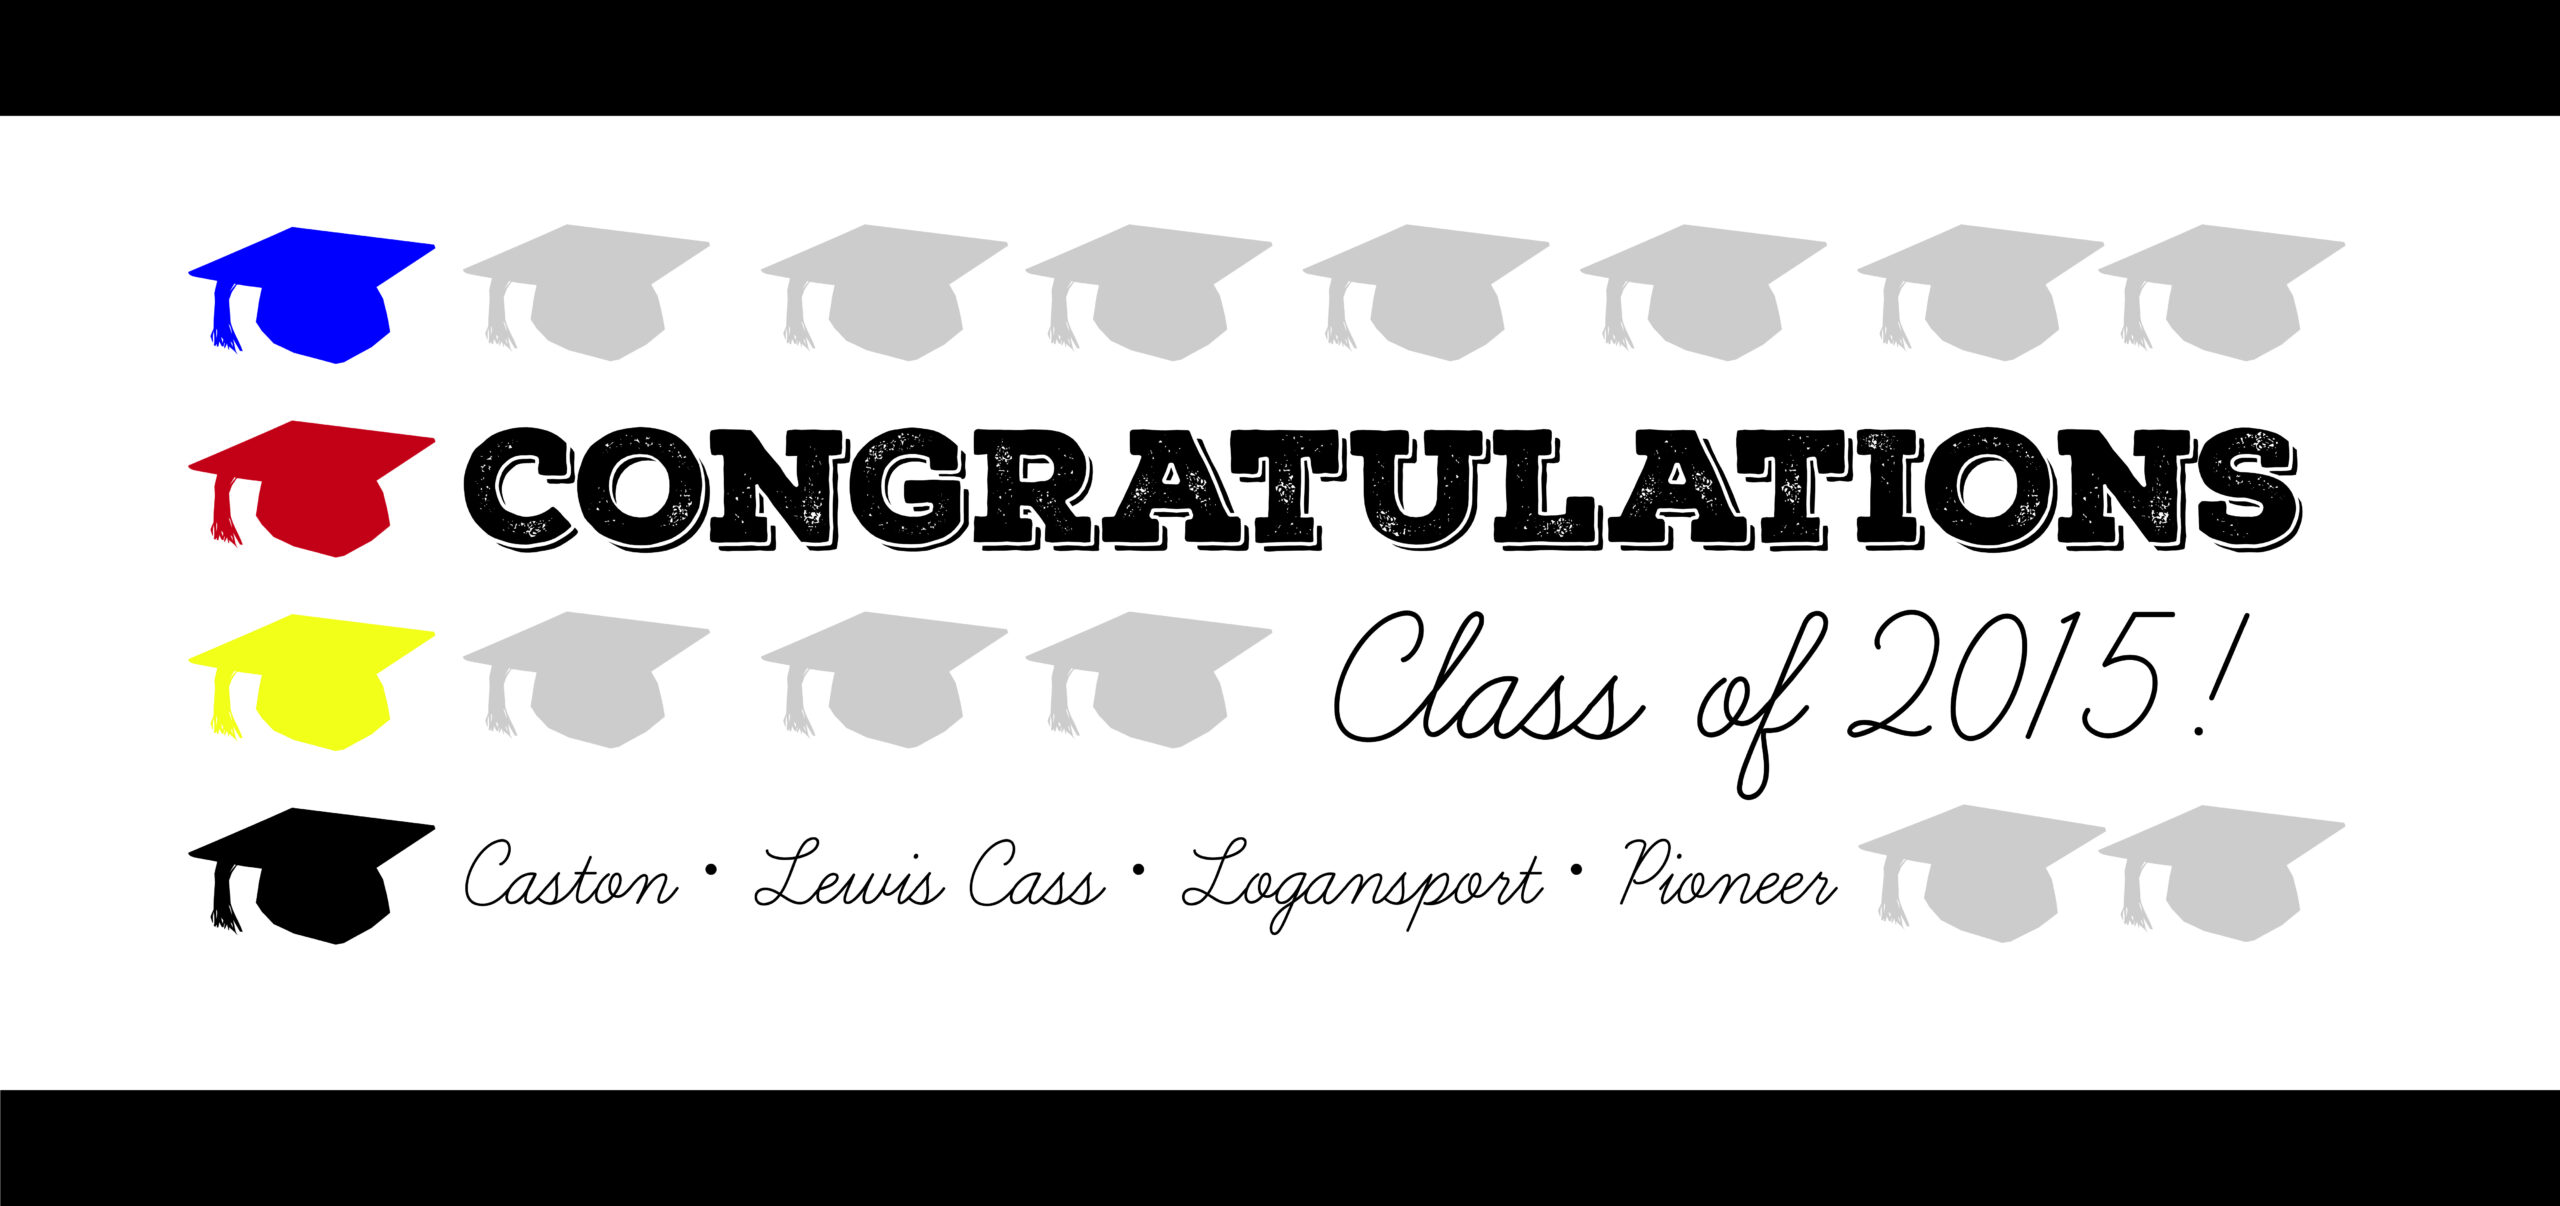 Thumbnail for the post titled: An Open Letter to the Class of 2015